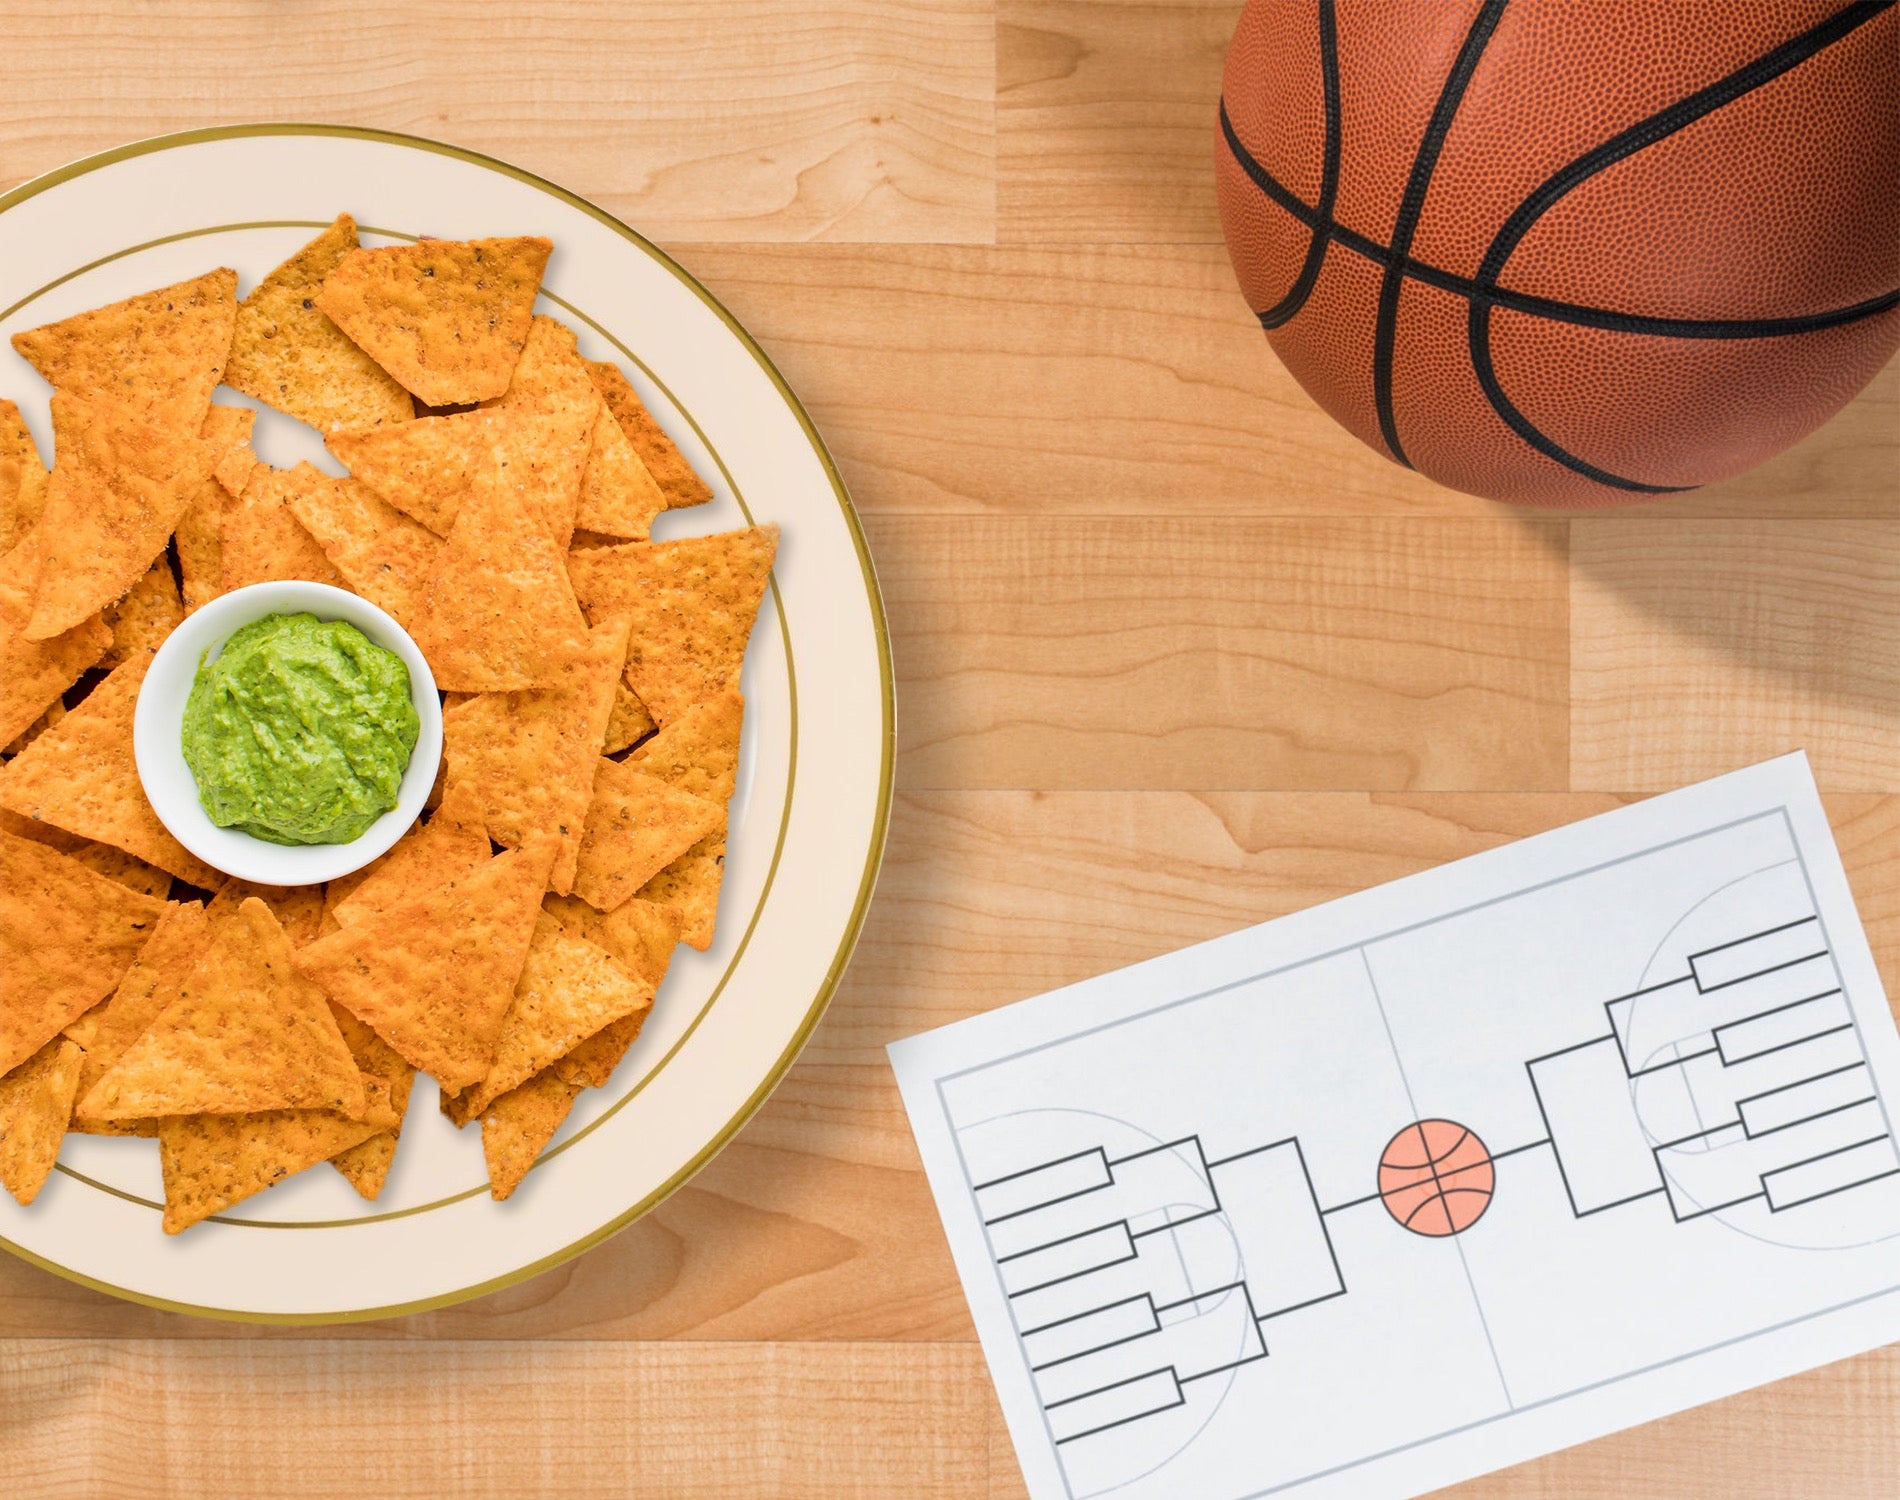 Have a Ball - Amazing March Madness Party Ideas